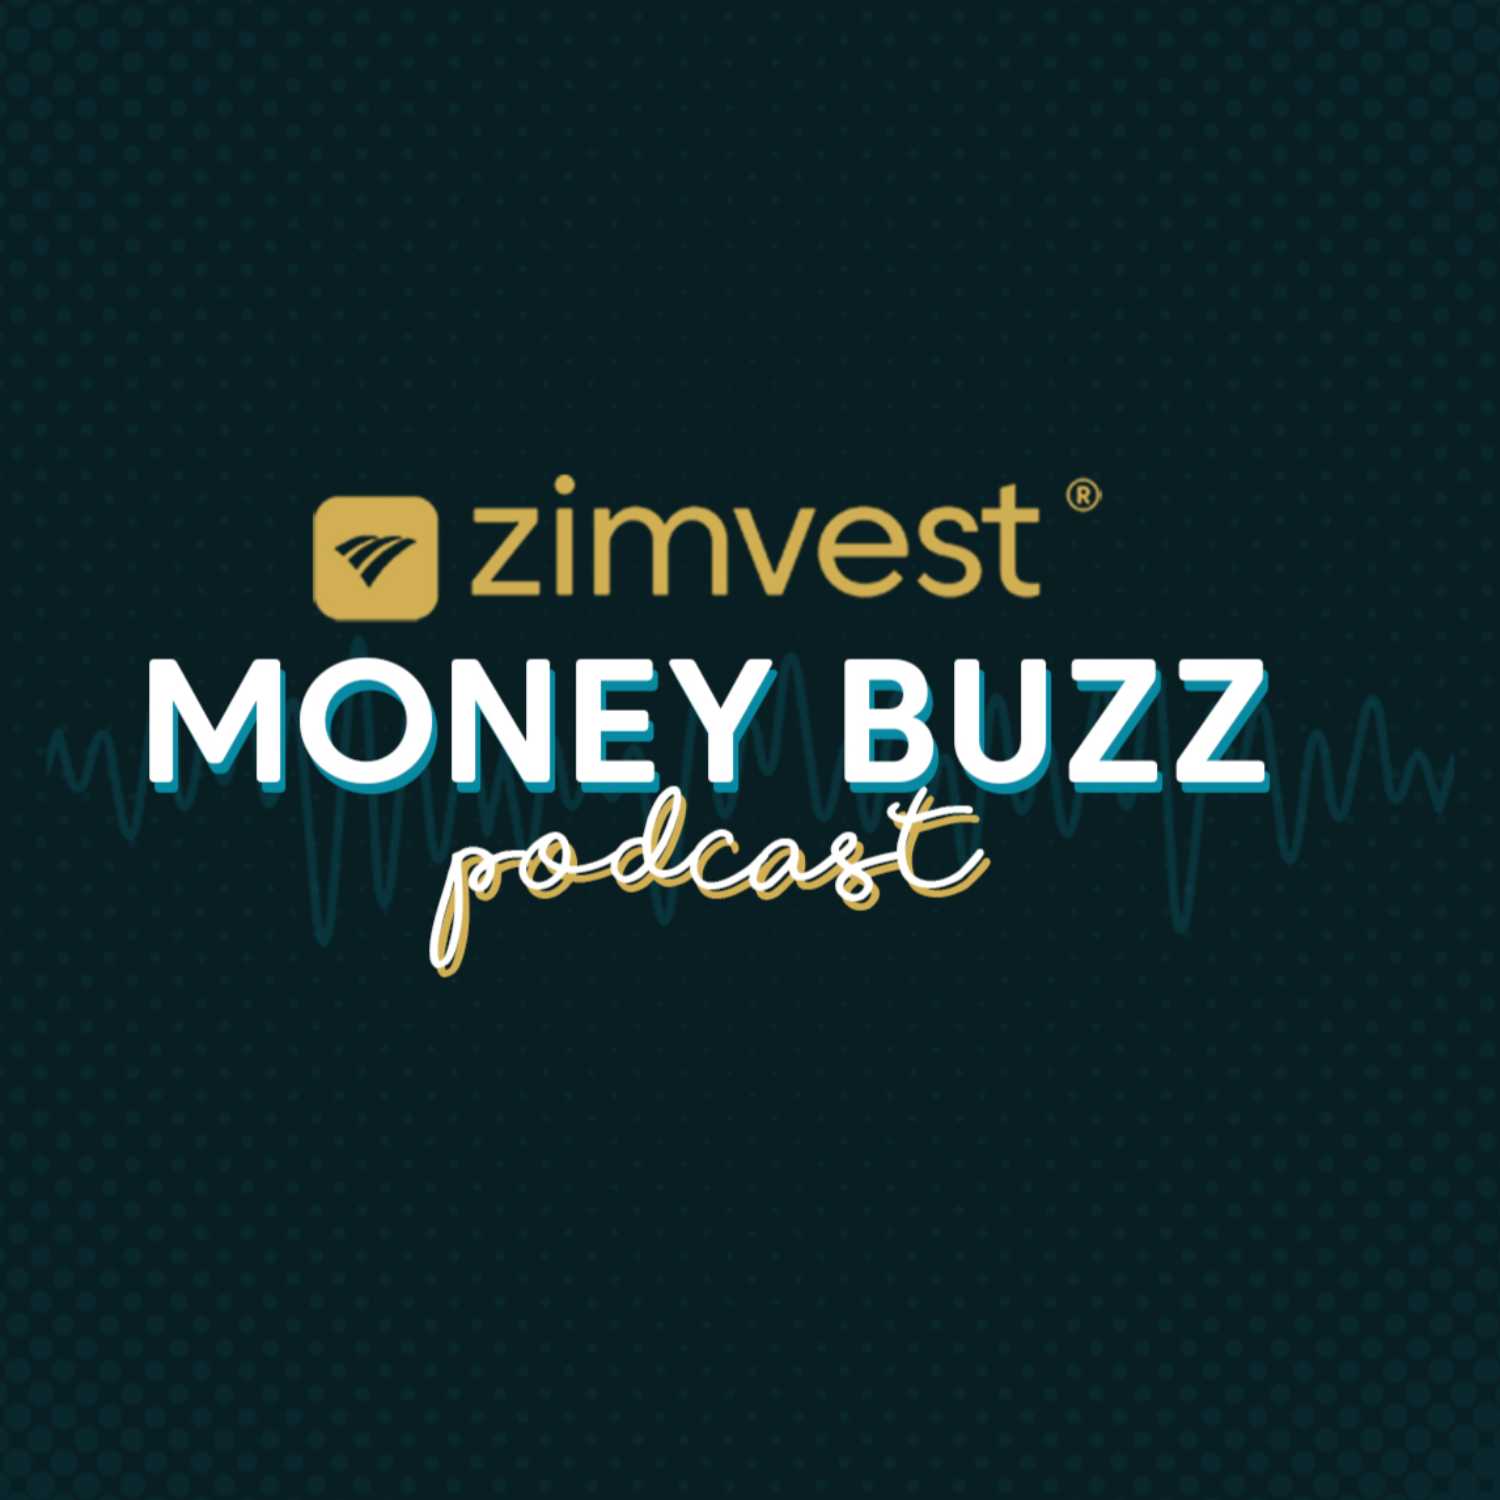 Zimvest Money Buzz Podcast Episode 1 - Covid-19 Experience: 2020 in review and a look at 2021